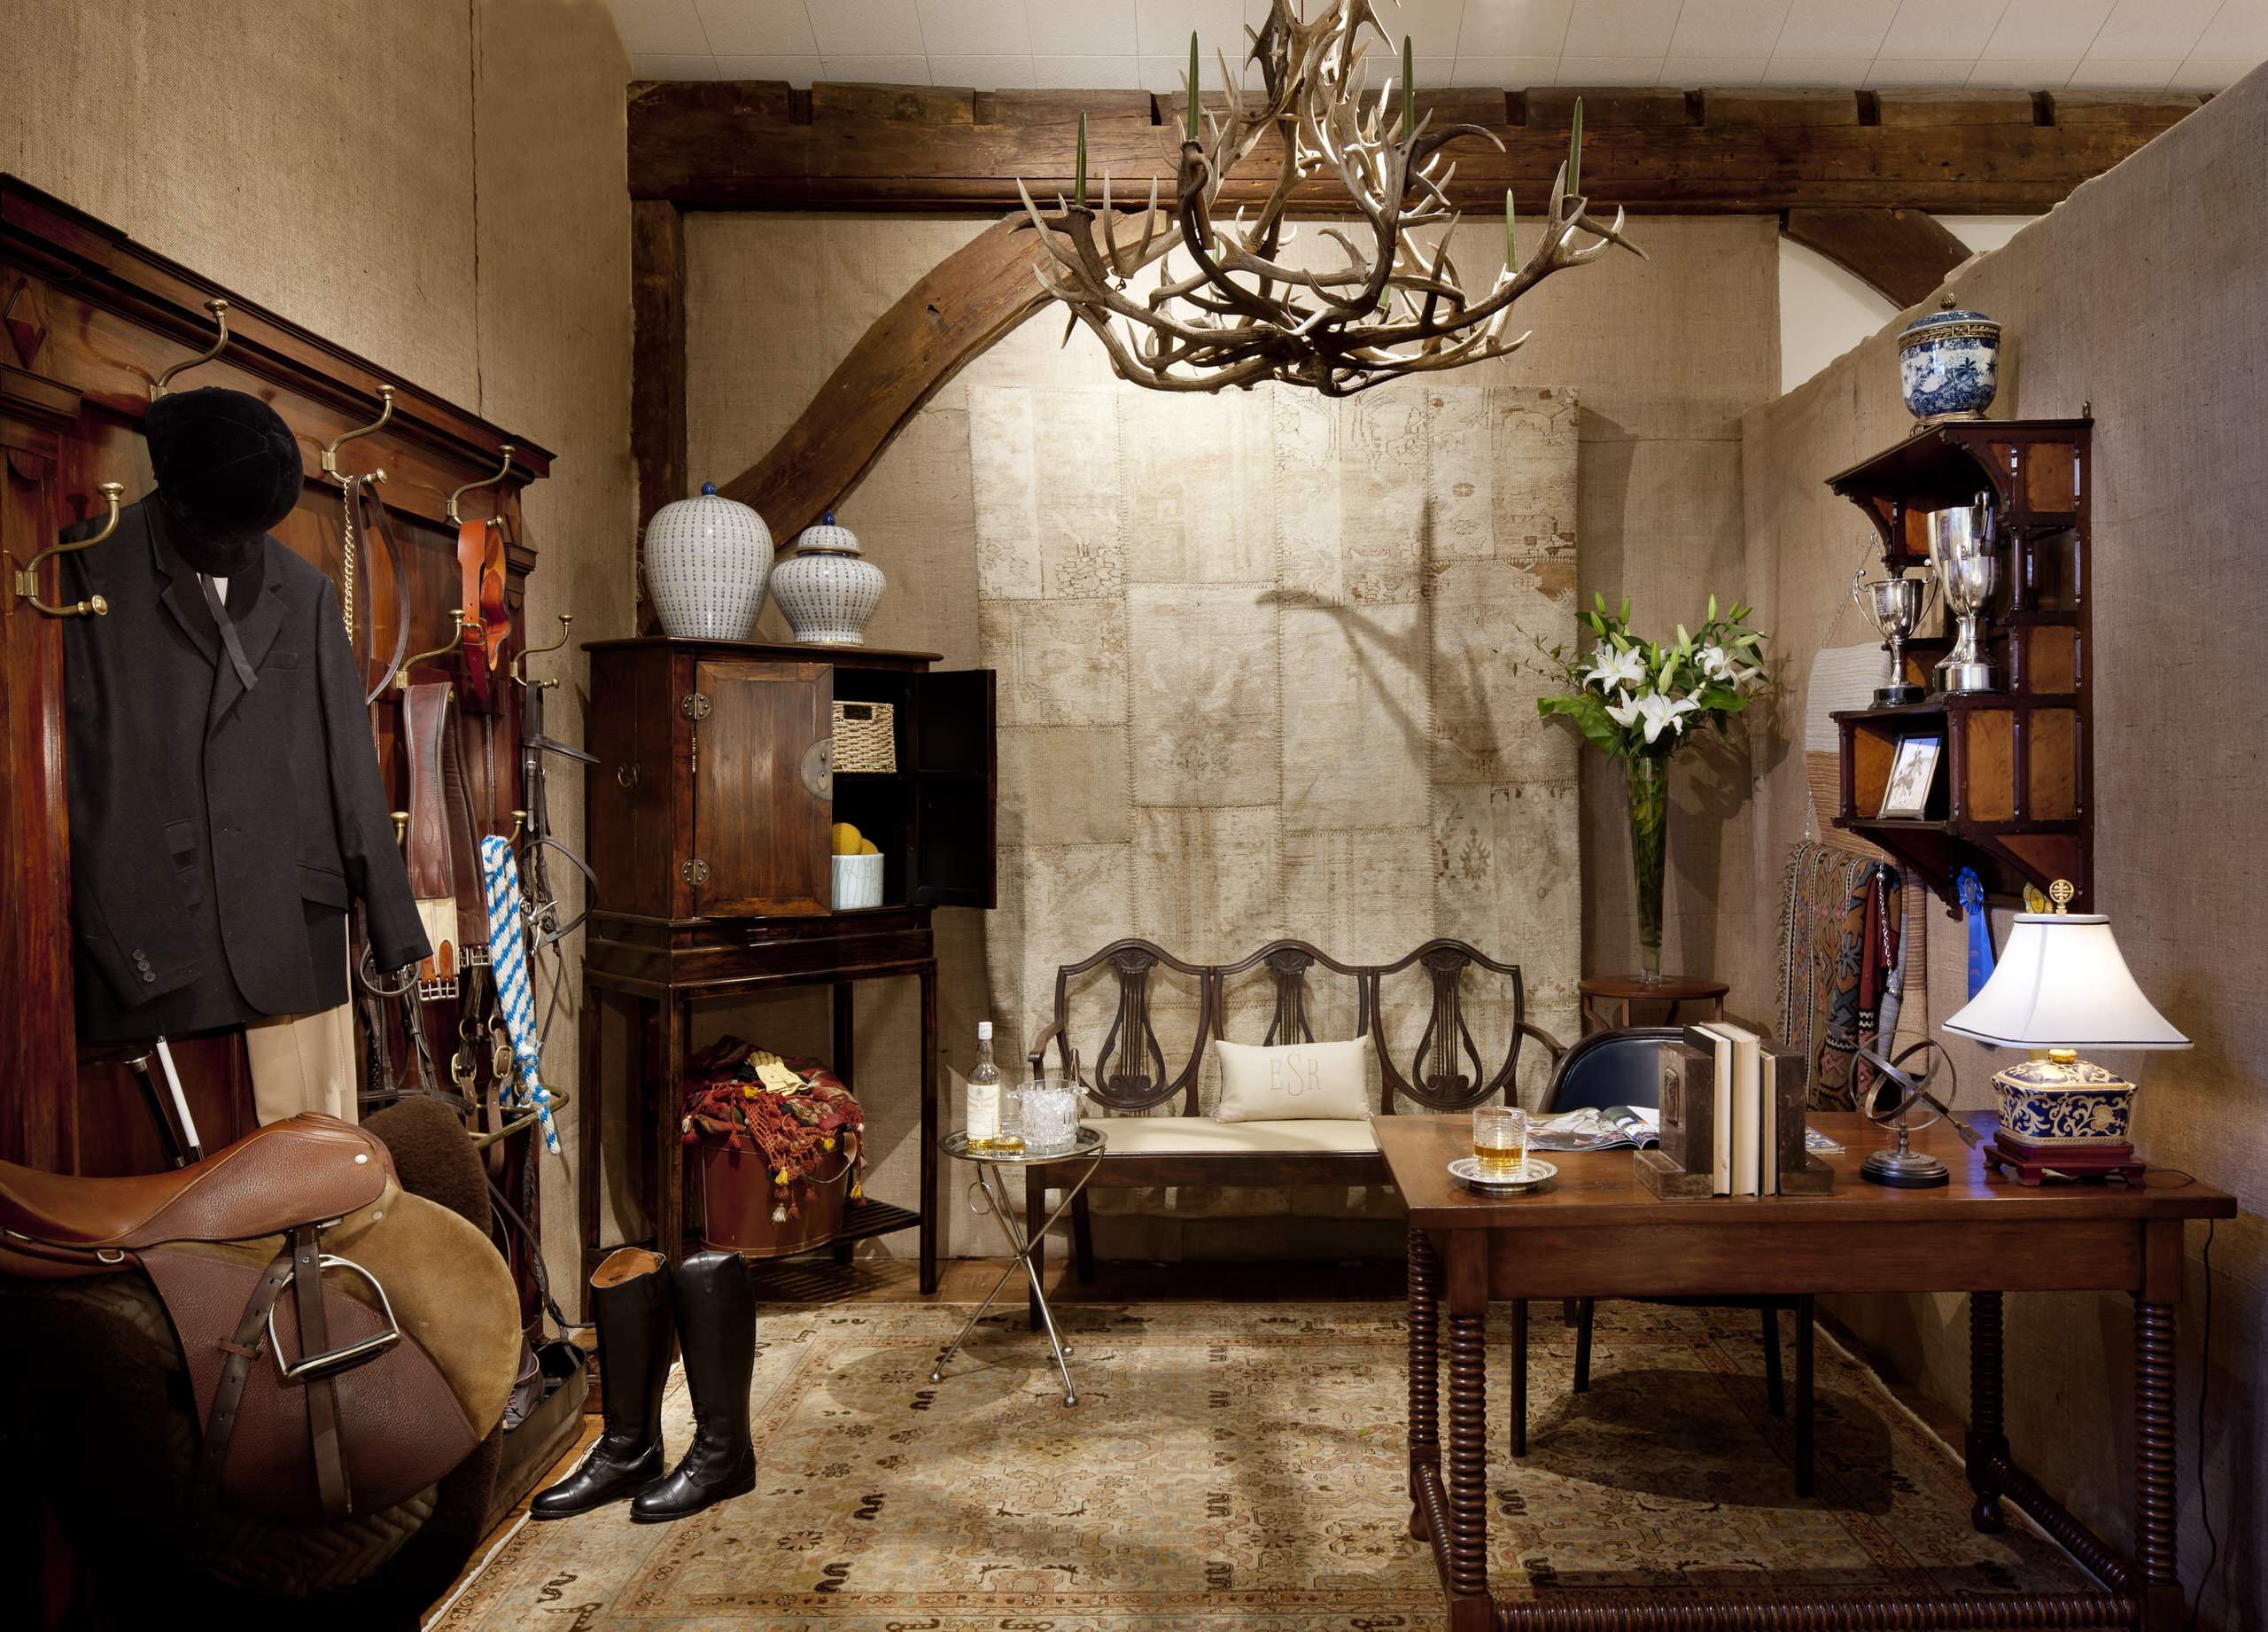 Tack Room - Traditional - Home Office - Boston - by Finn-Martens Design |  Houzz